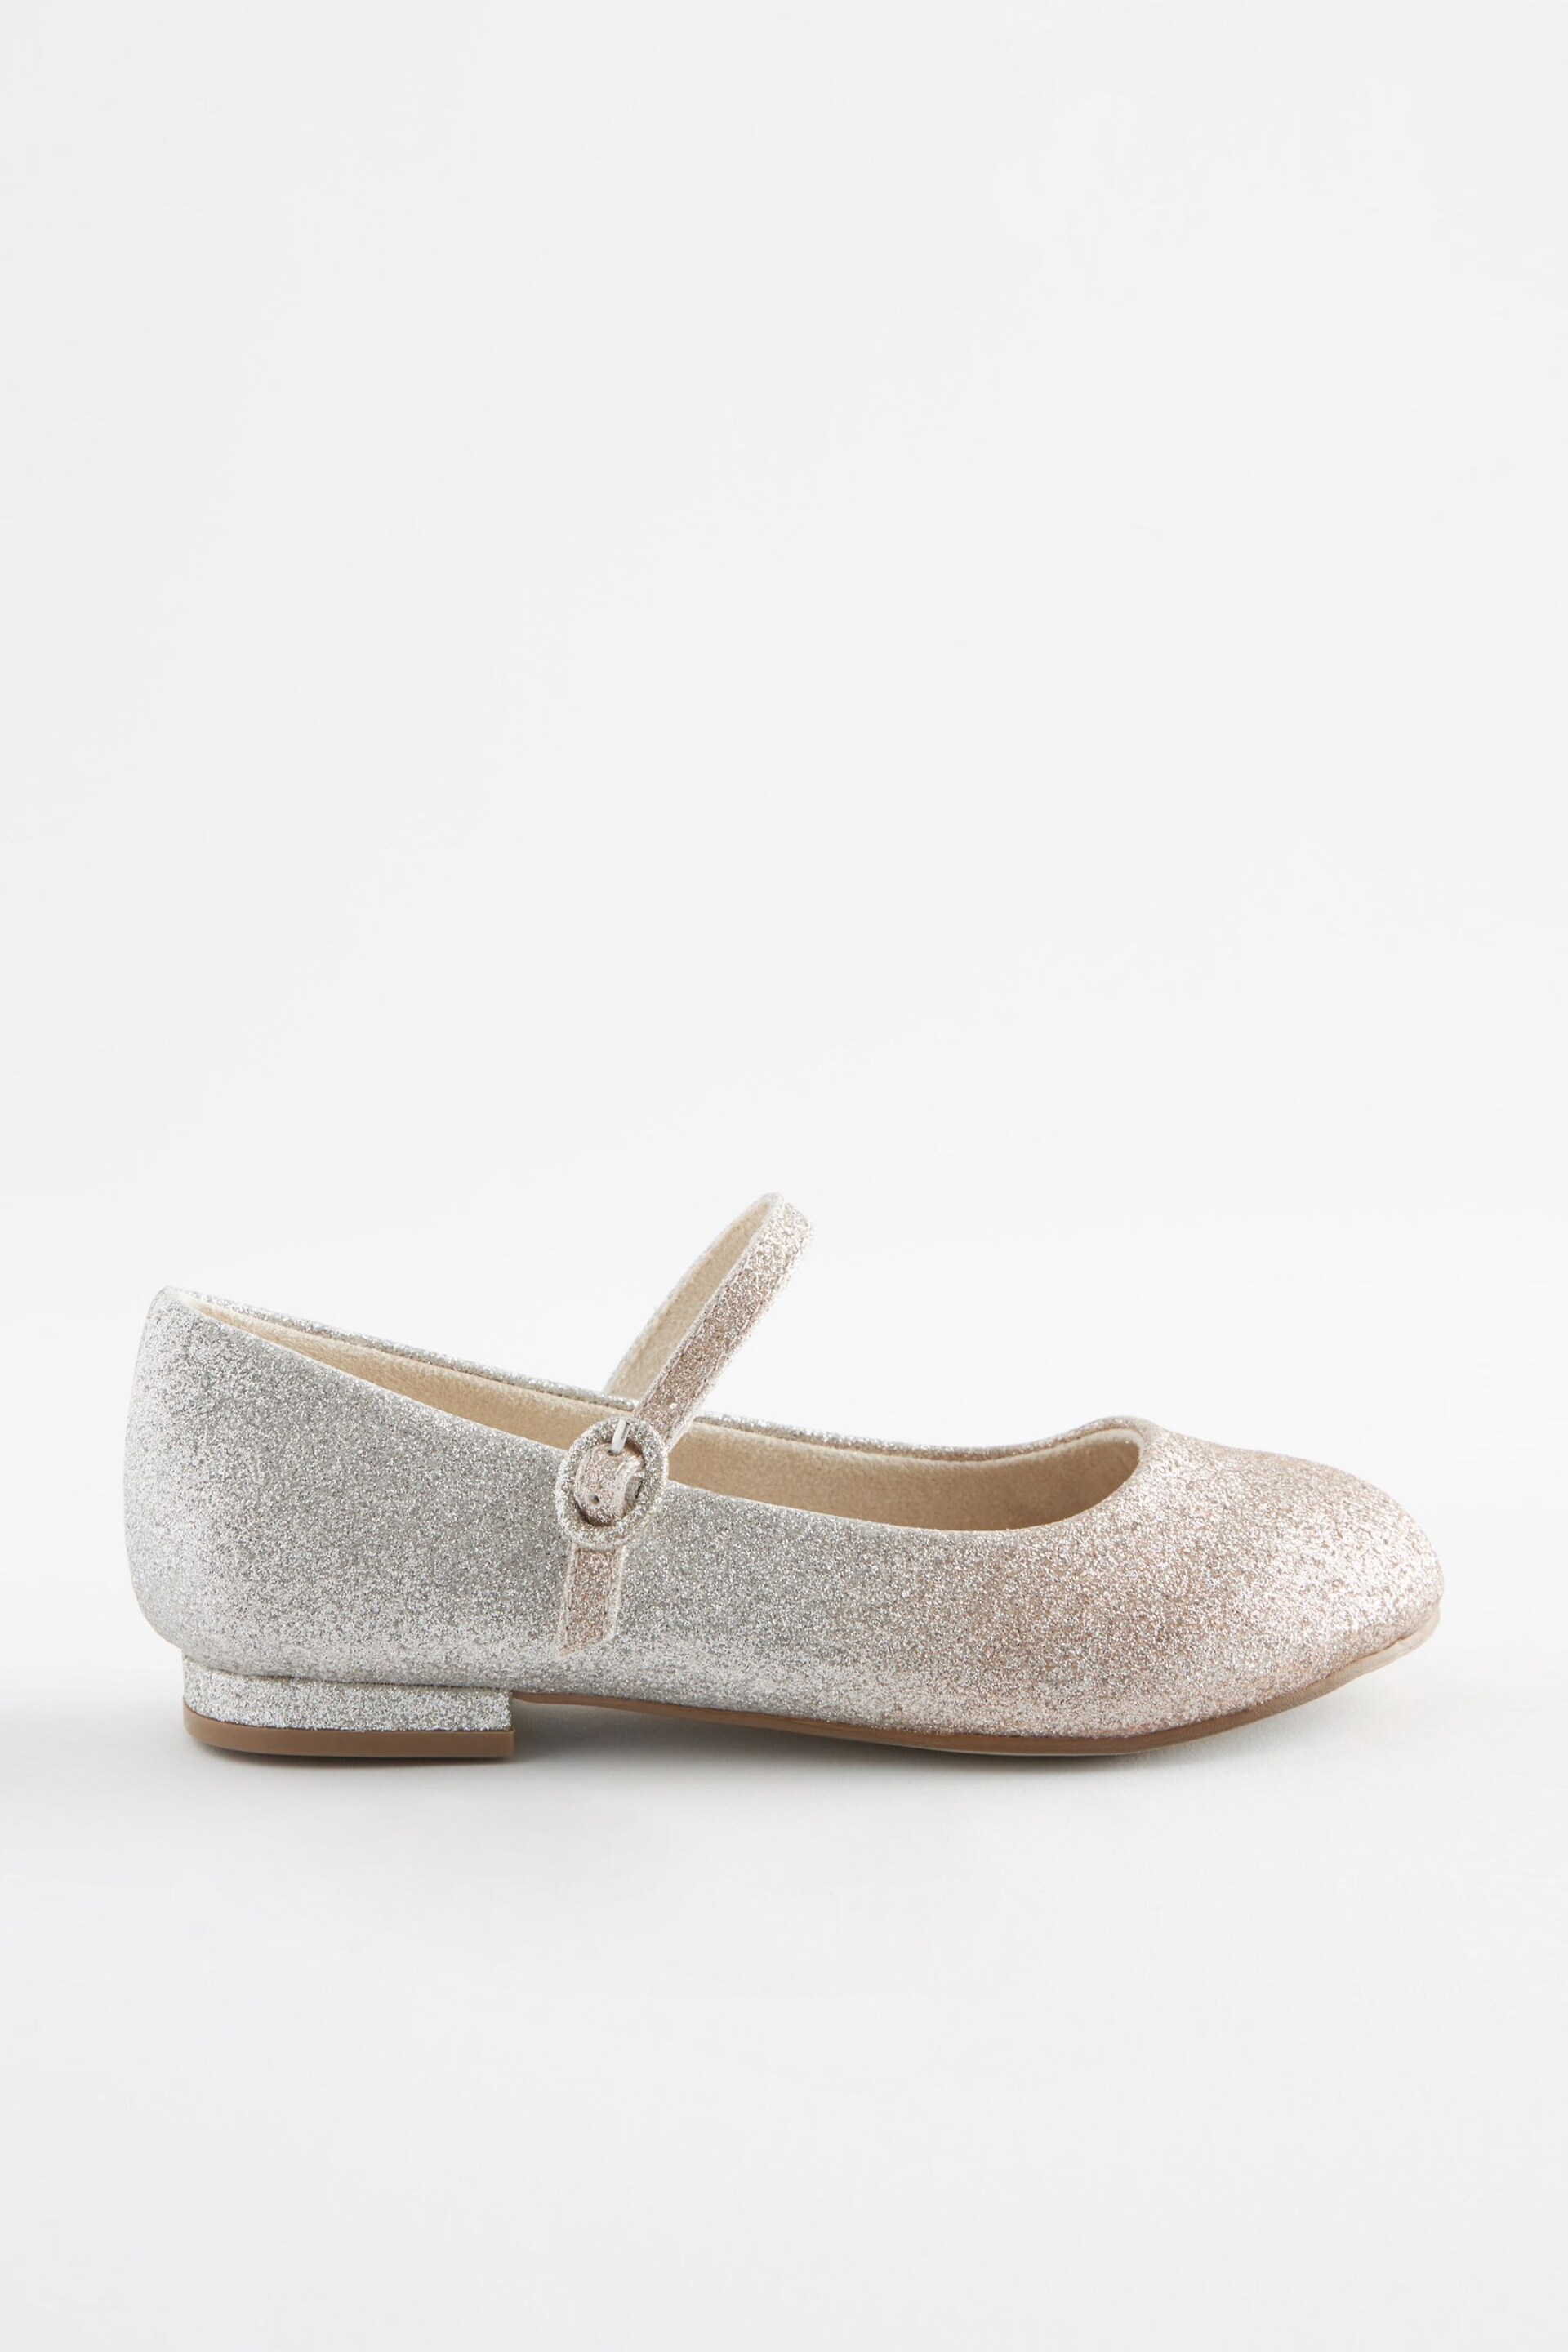 Ombre Gold/Silver Glitter Wide Fit (G) Mary Jane Occasion Shoes - Image 2 of 6